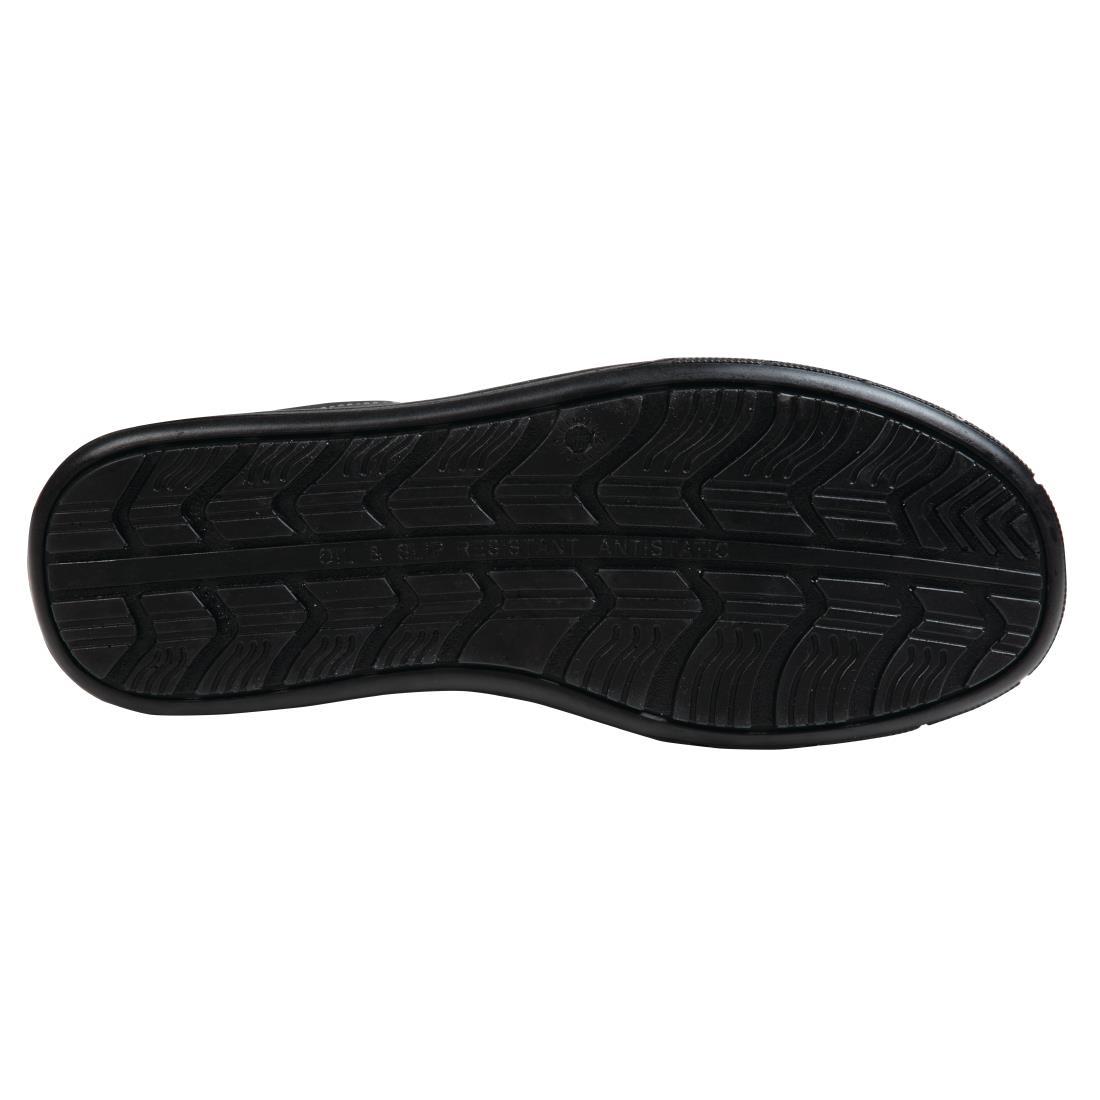 Slipbuster Safety Trainers Black 38 - BB420-38  - 2